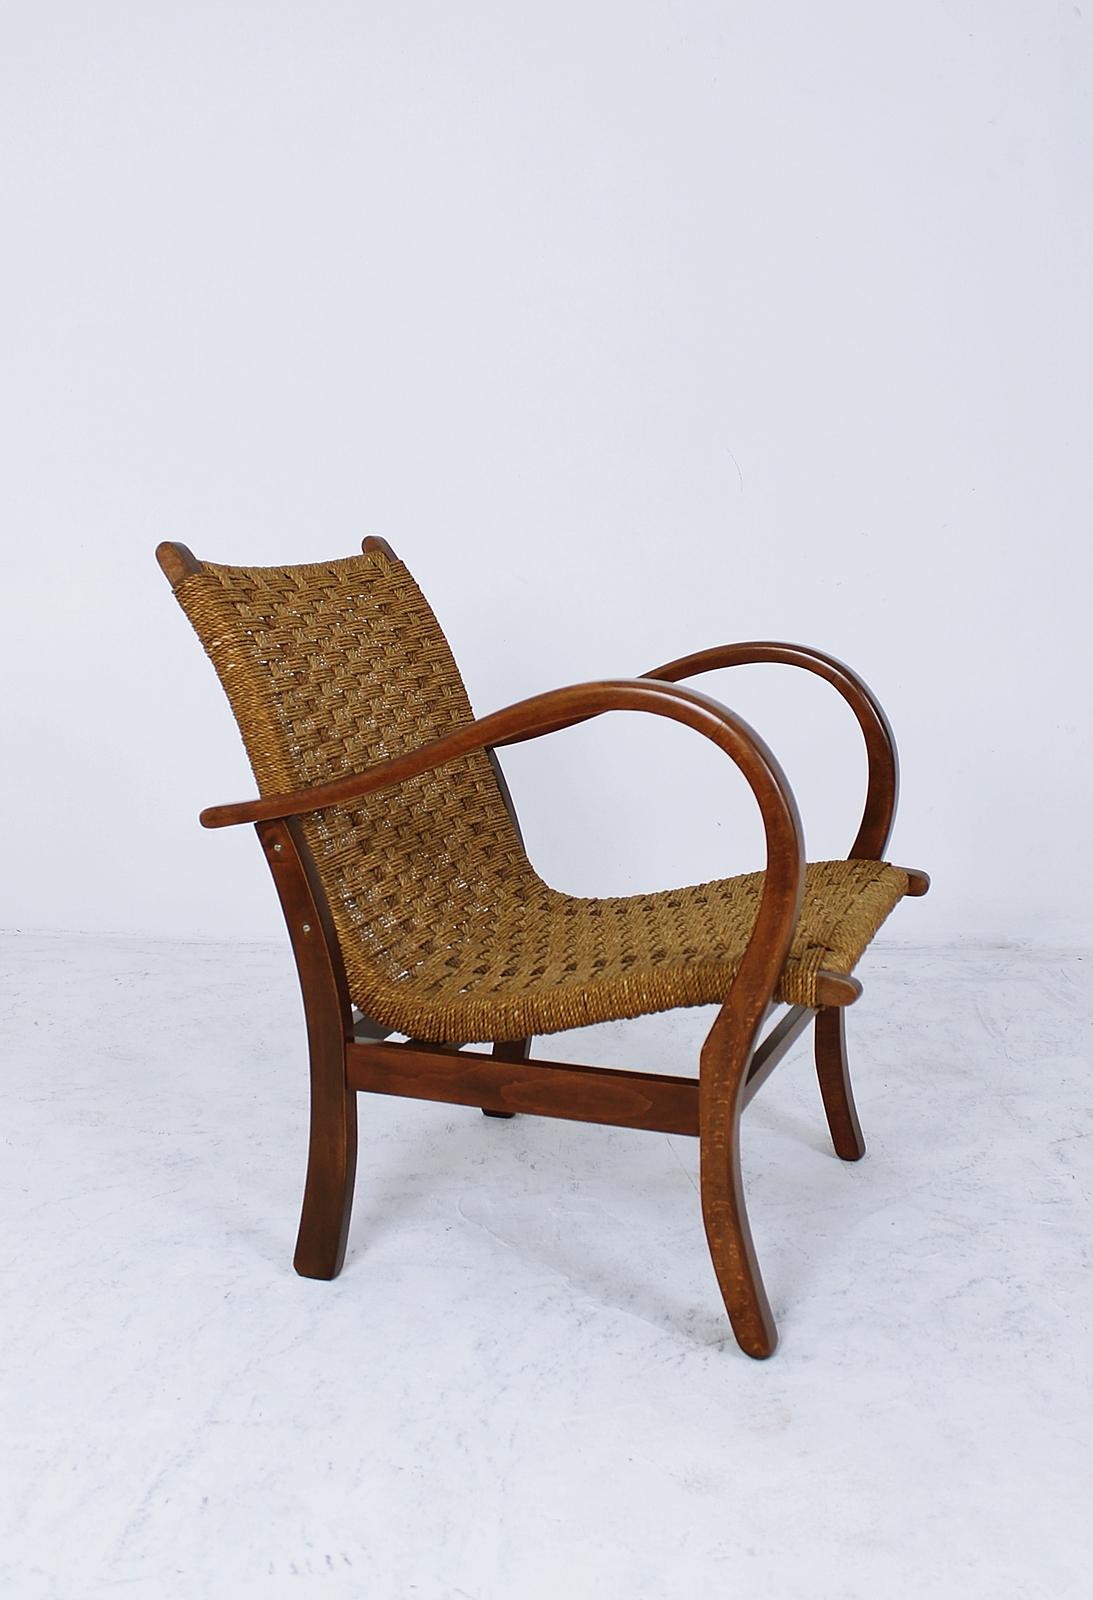 Bauhaus easy armchair made in Germany, designed by Erich Dieckmann in the 1920s-1930s. The structure is in beech and the backs and seated in braided rope. Very comfortable. In restored condition.